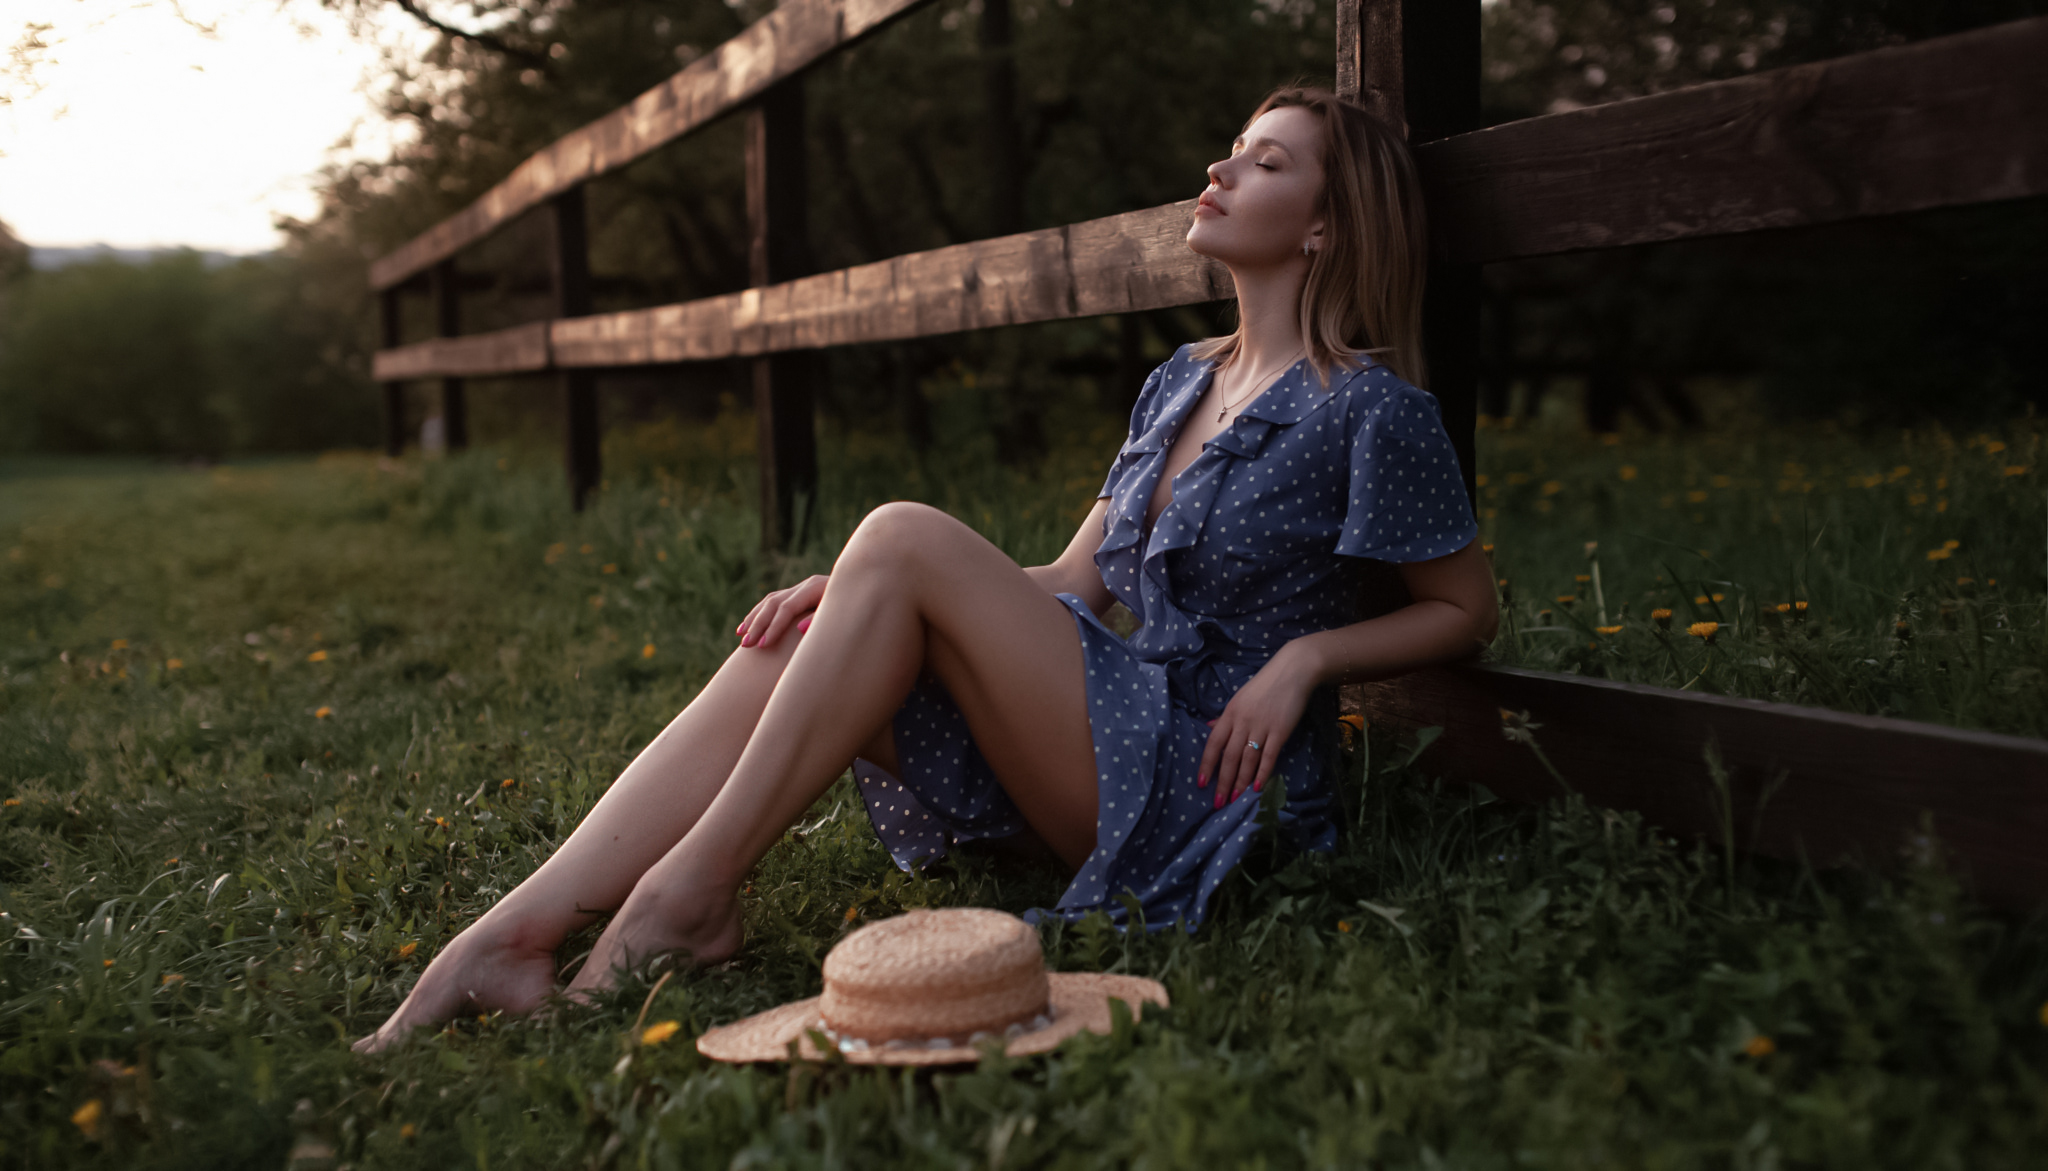 People 2048x1171 Andrey Frolov women blonde closed eyes dress barefoot legs dots blue clothing hat grass women outdoors outdoors polka dots fence sensual gaze sitting blue dress painted nails pink nails brunette